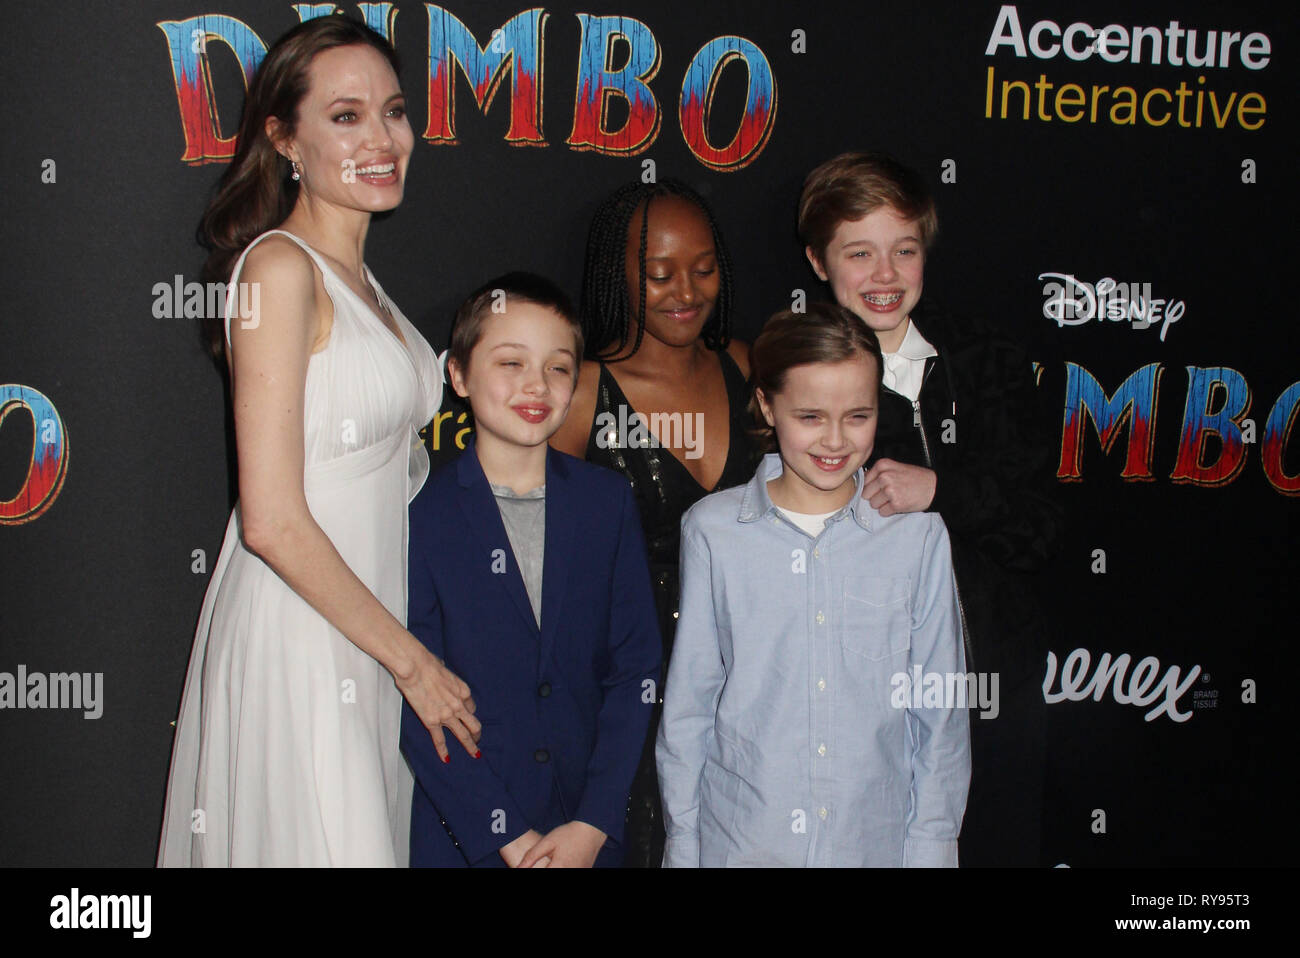 Angelina Jolie, Knox Jolie-Pitt, Zahara Jolie-Pitt, Vivienne Jolie-Pitt, Shiloh Jolie-Pitt  03/11/2019 The World Premiere of 'Dumbo' held at El Capitan Theatre and Ray Dolby Ballroom, Lowes Hollywood Hotel in Los Angeles, CA. Photo by HNW / PictureLux Stock Photo